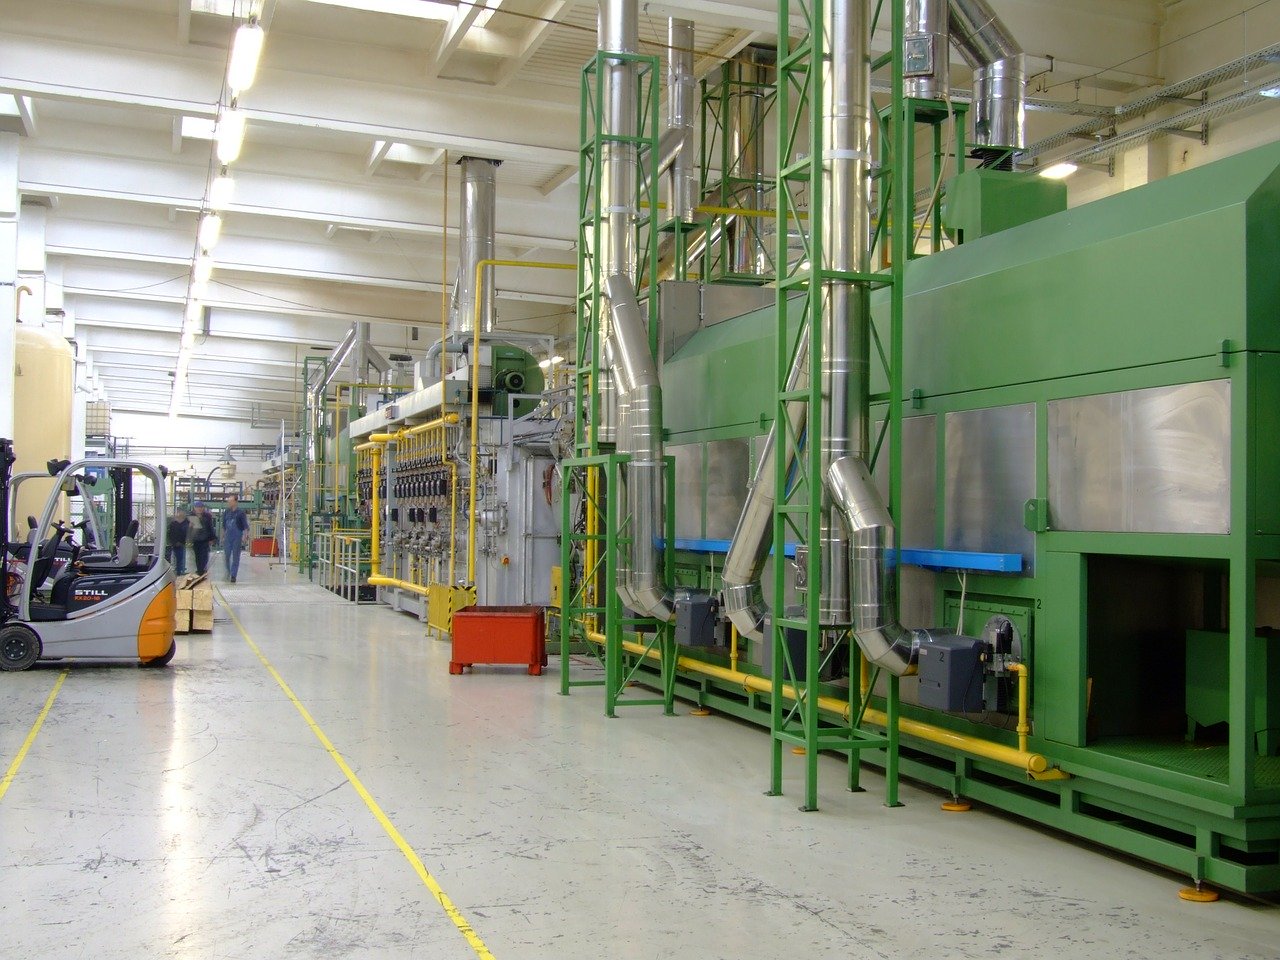 Interior of a Manufacturing Facility